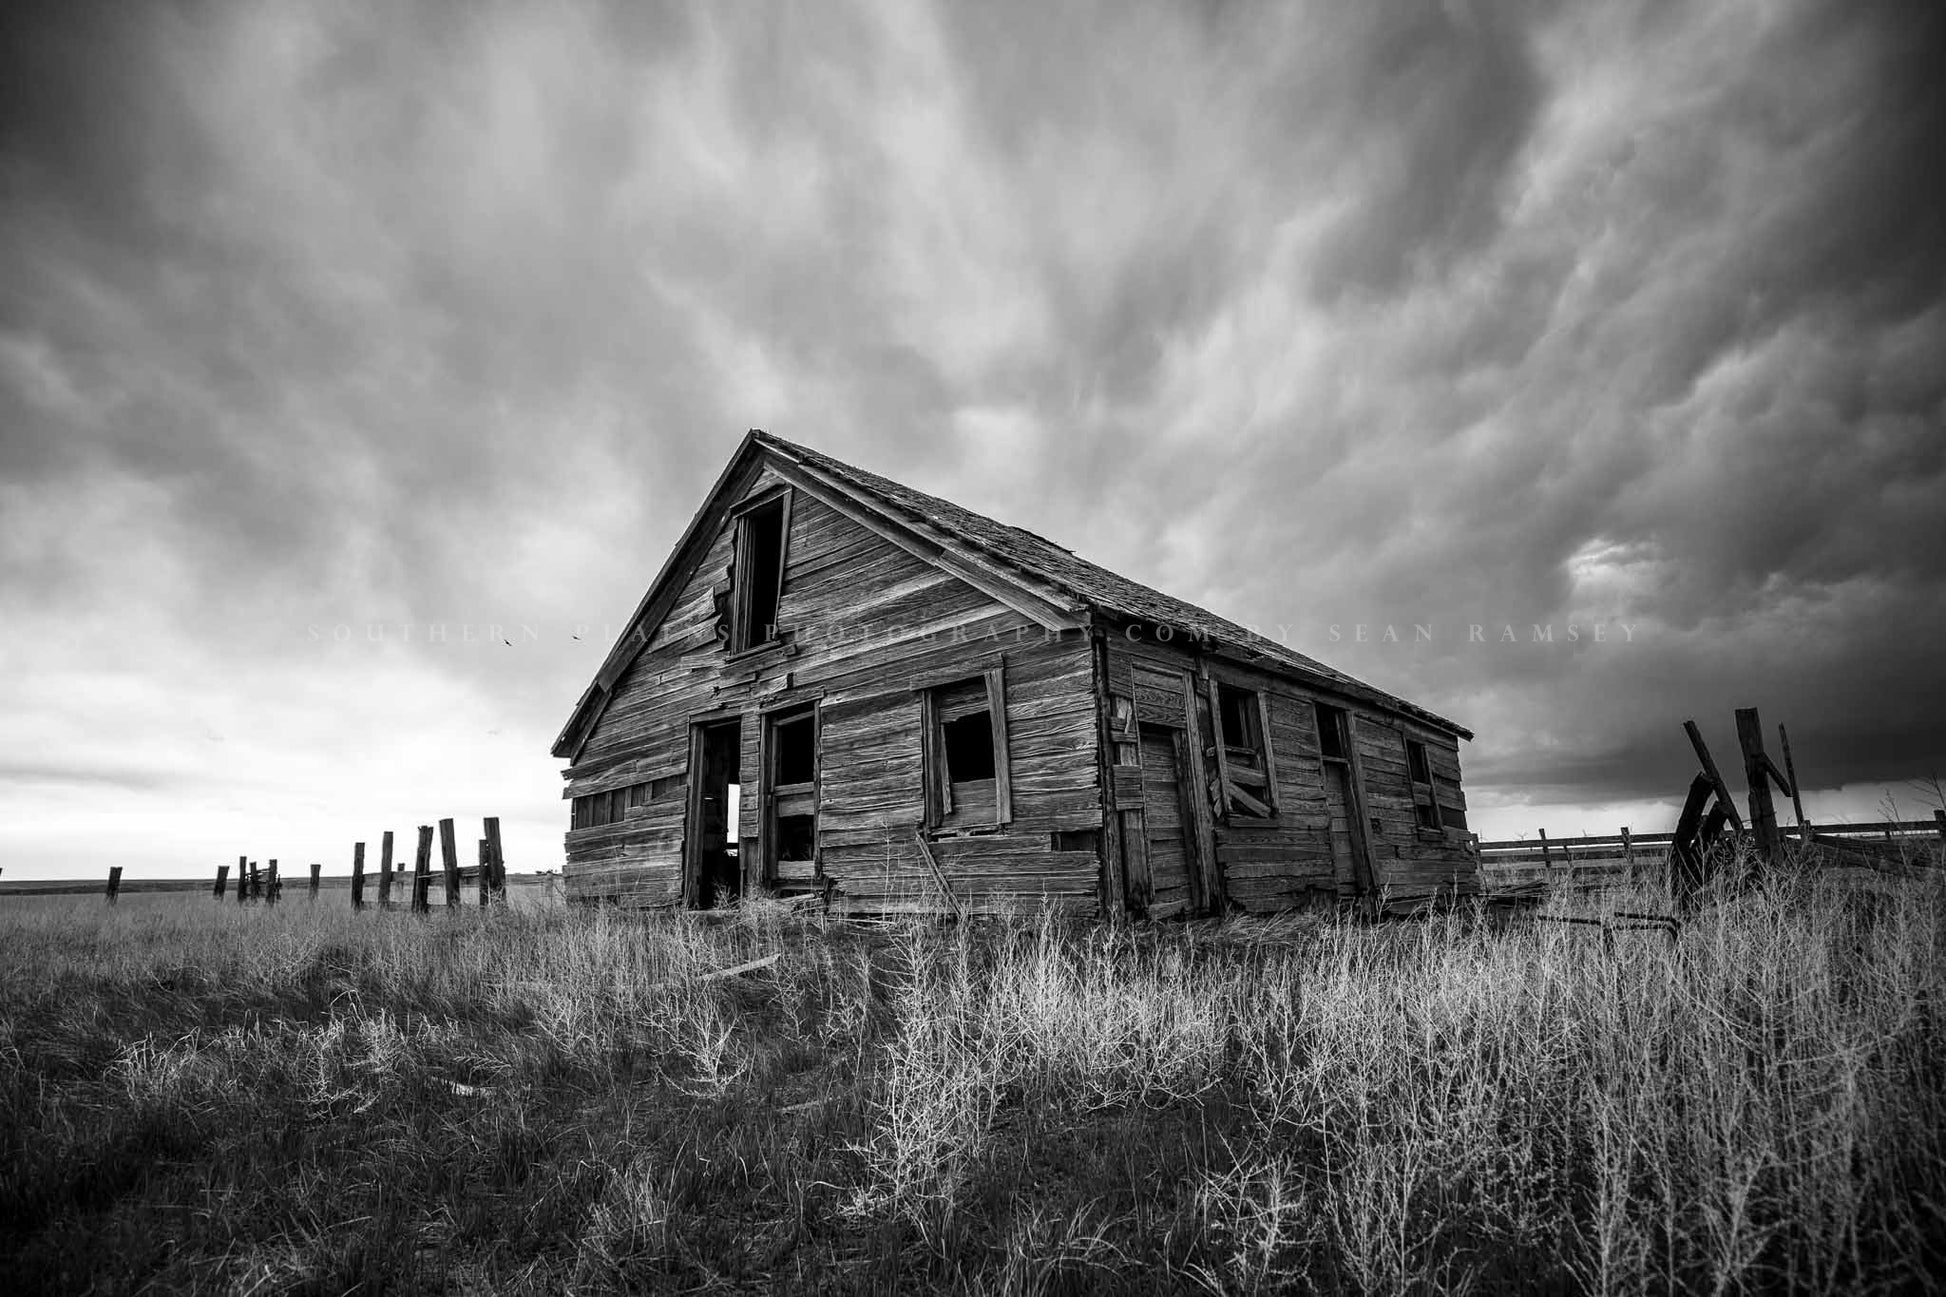 Rustic black and white photography print of an old abandoned homestead under a stormy sky on the plains of Colorado by Sean Ramsey of Southern Plains Photography.